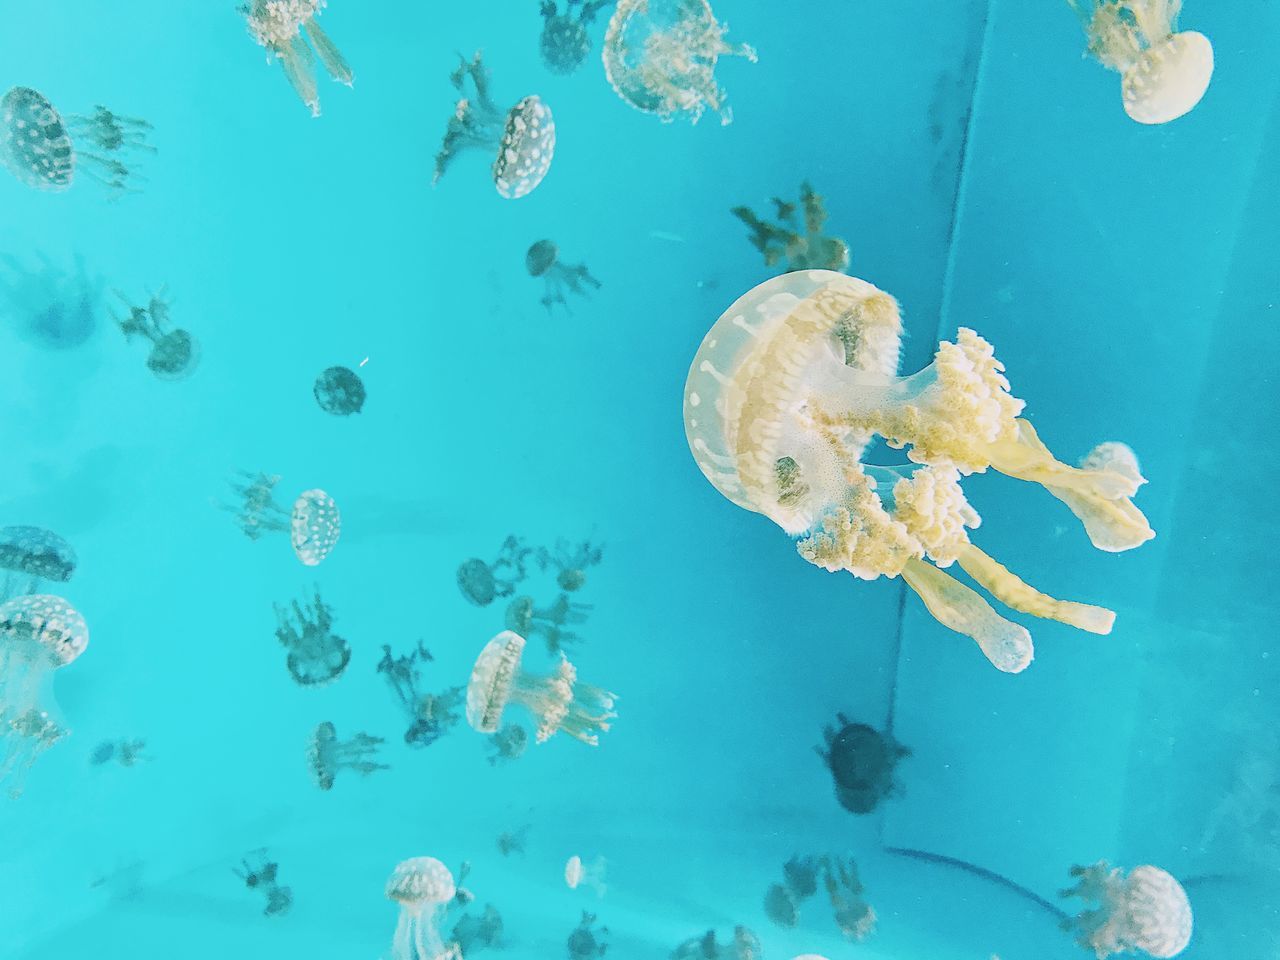 jellyfish, underwater, water, sea life, swimming, no people, animal themes, floating in water, animals in the wild, smooth, undersea, sea, nature, close-up, beauty in nature, day